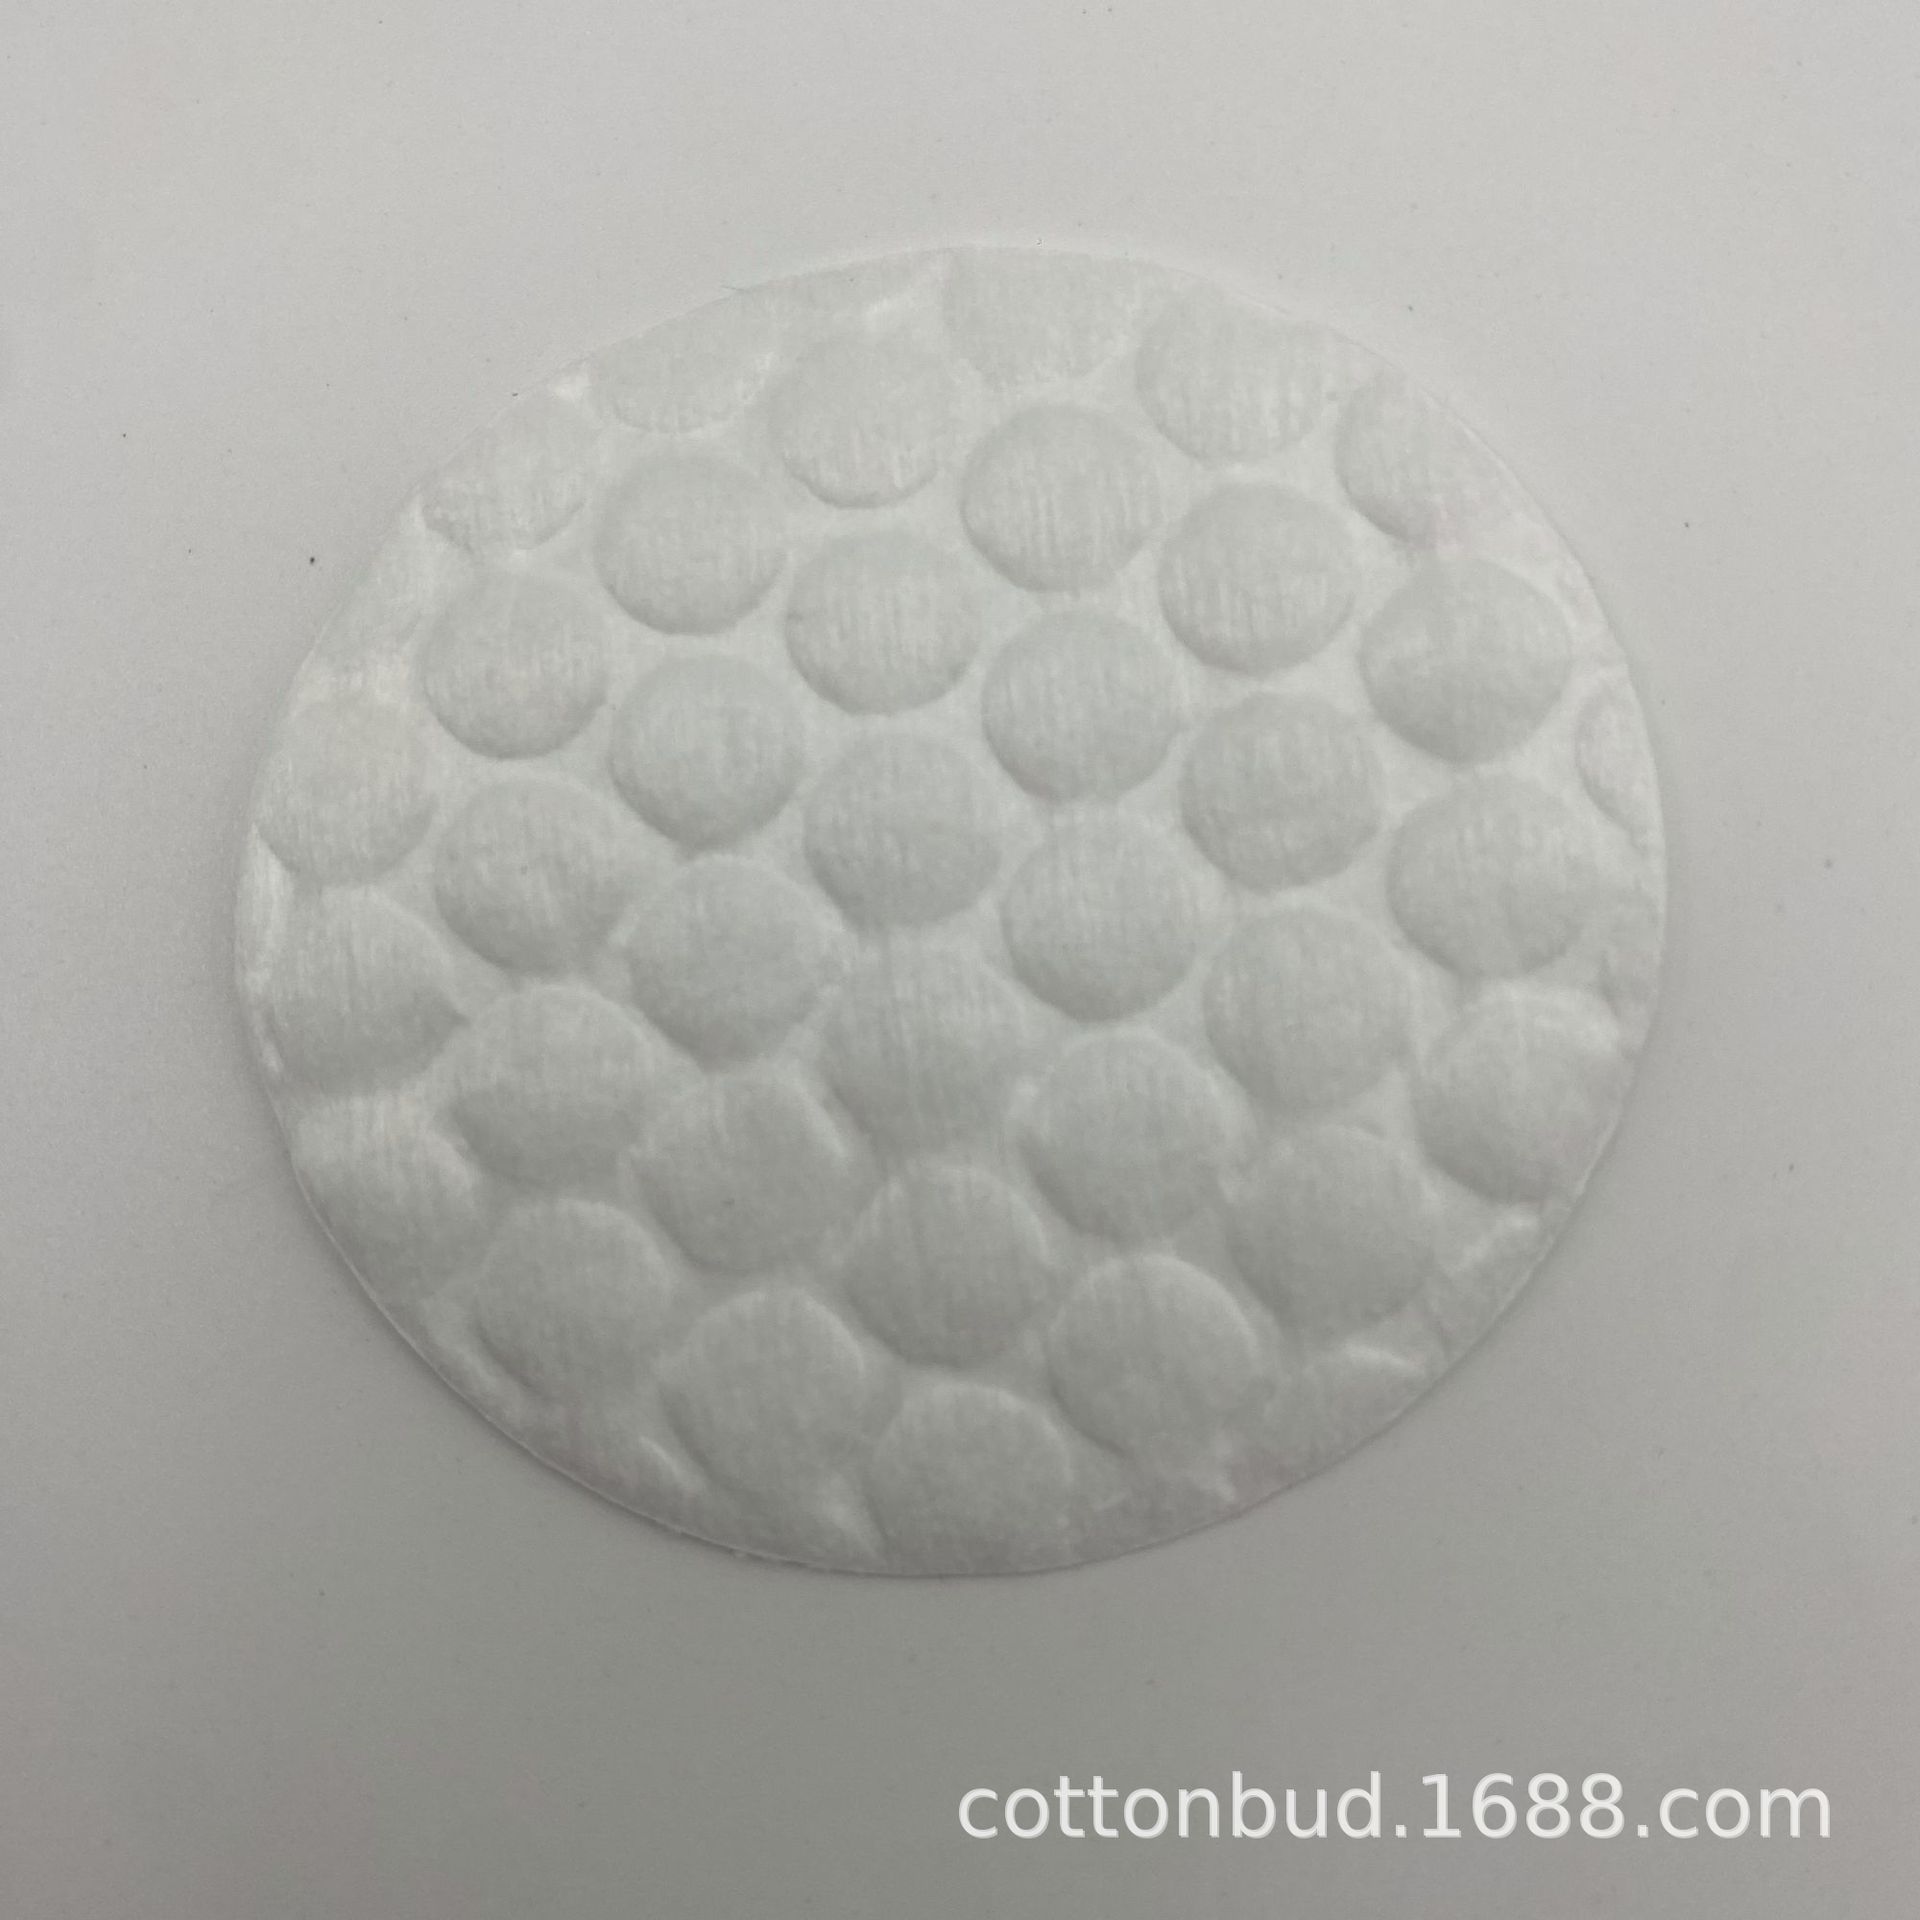 Factory Direct Sales Cotton Puff 100 Pieces Disposable Beauty Cotton Pad for Makeup Remover Cotton Puff Cotton, Spray Glue, Non-Woven Fabric, Synthetic